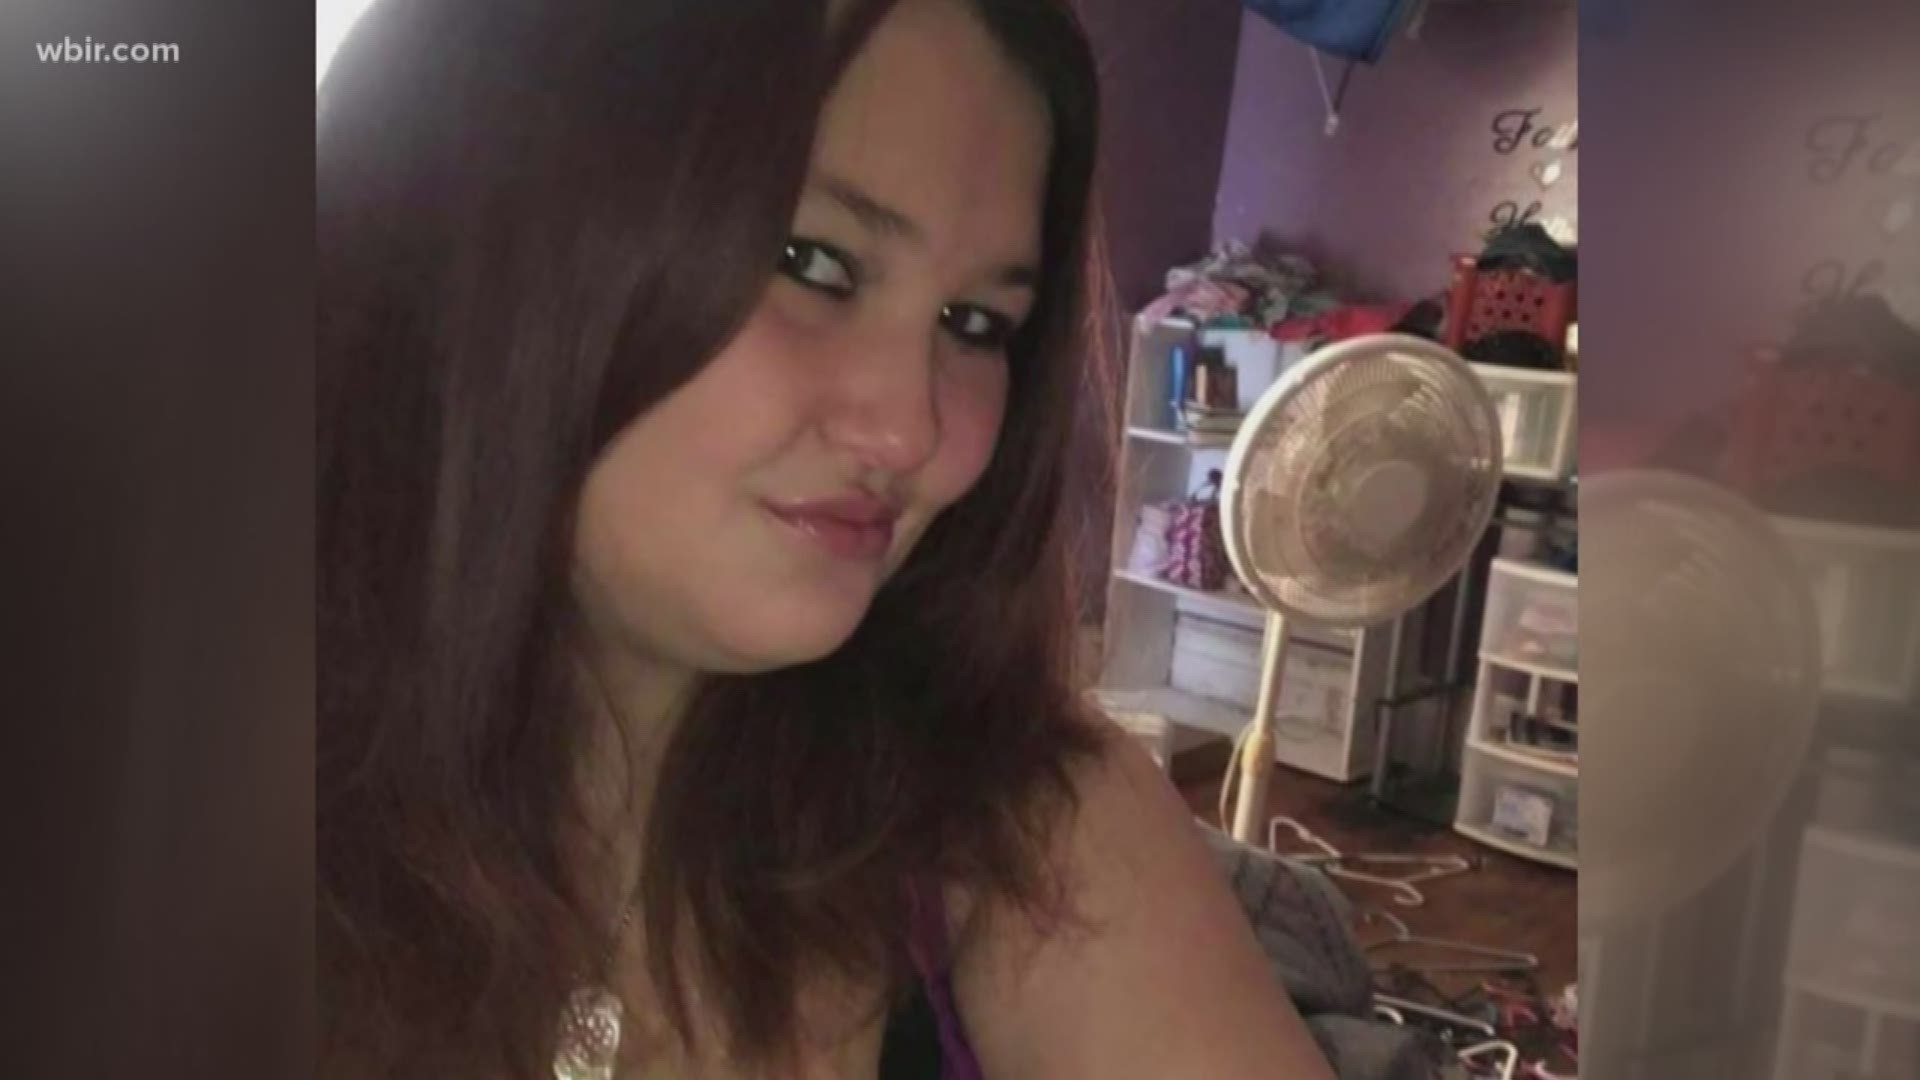 One of the victims was 21-year-old Elizabeth VanMeter. Her family says she met the alleged killer while working at the carnival- and she wanted them to meet him.